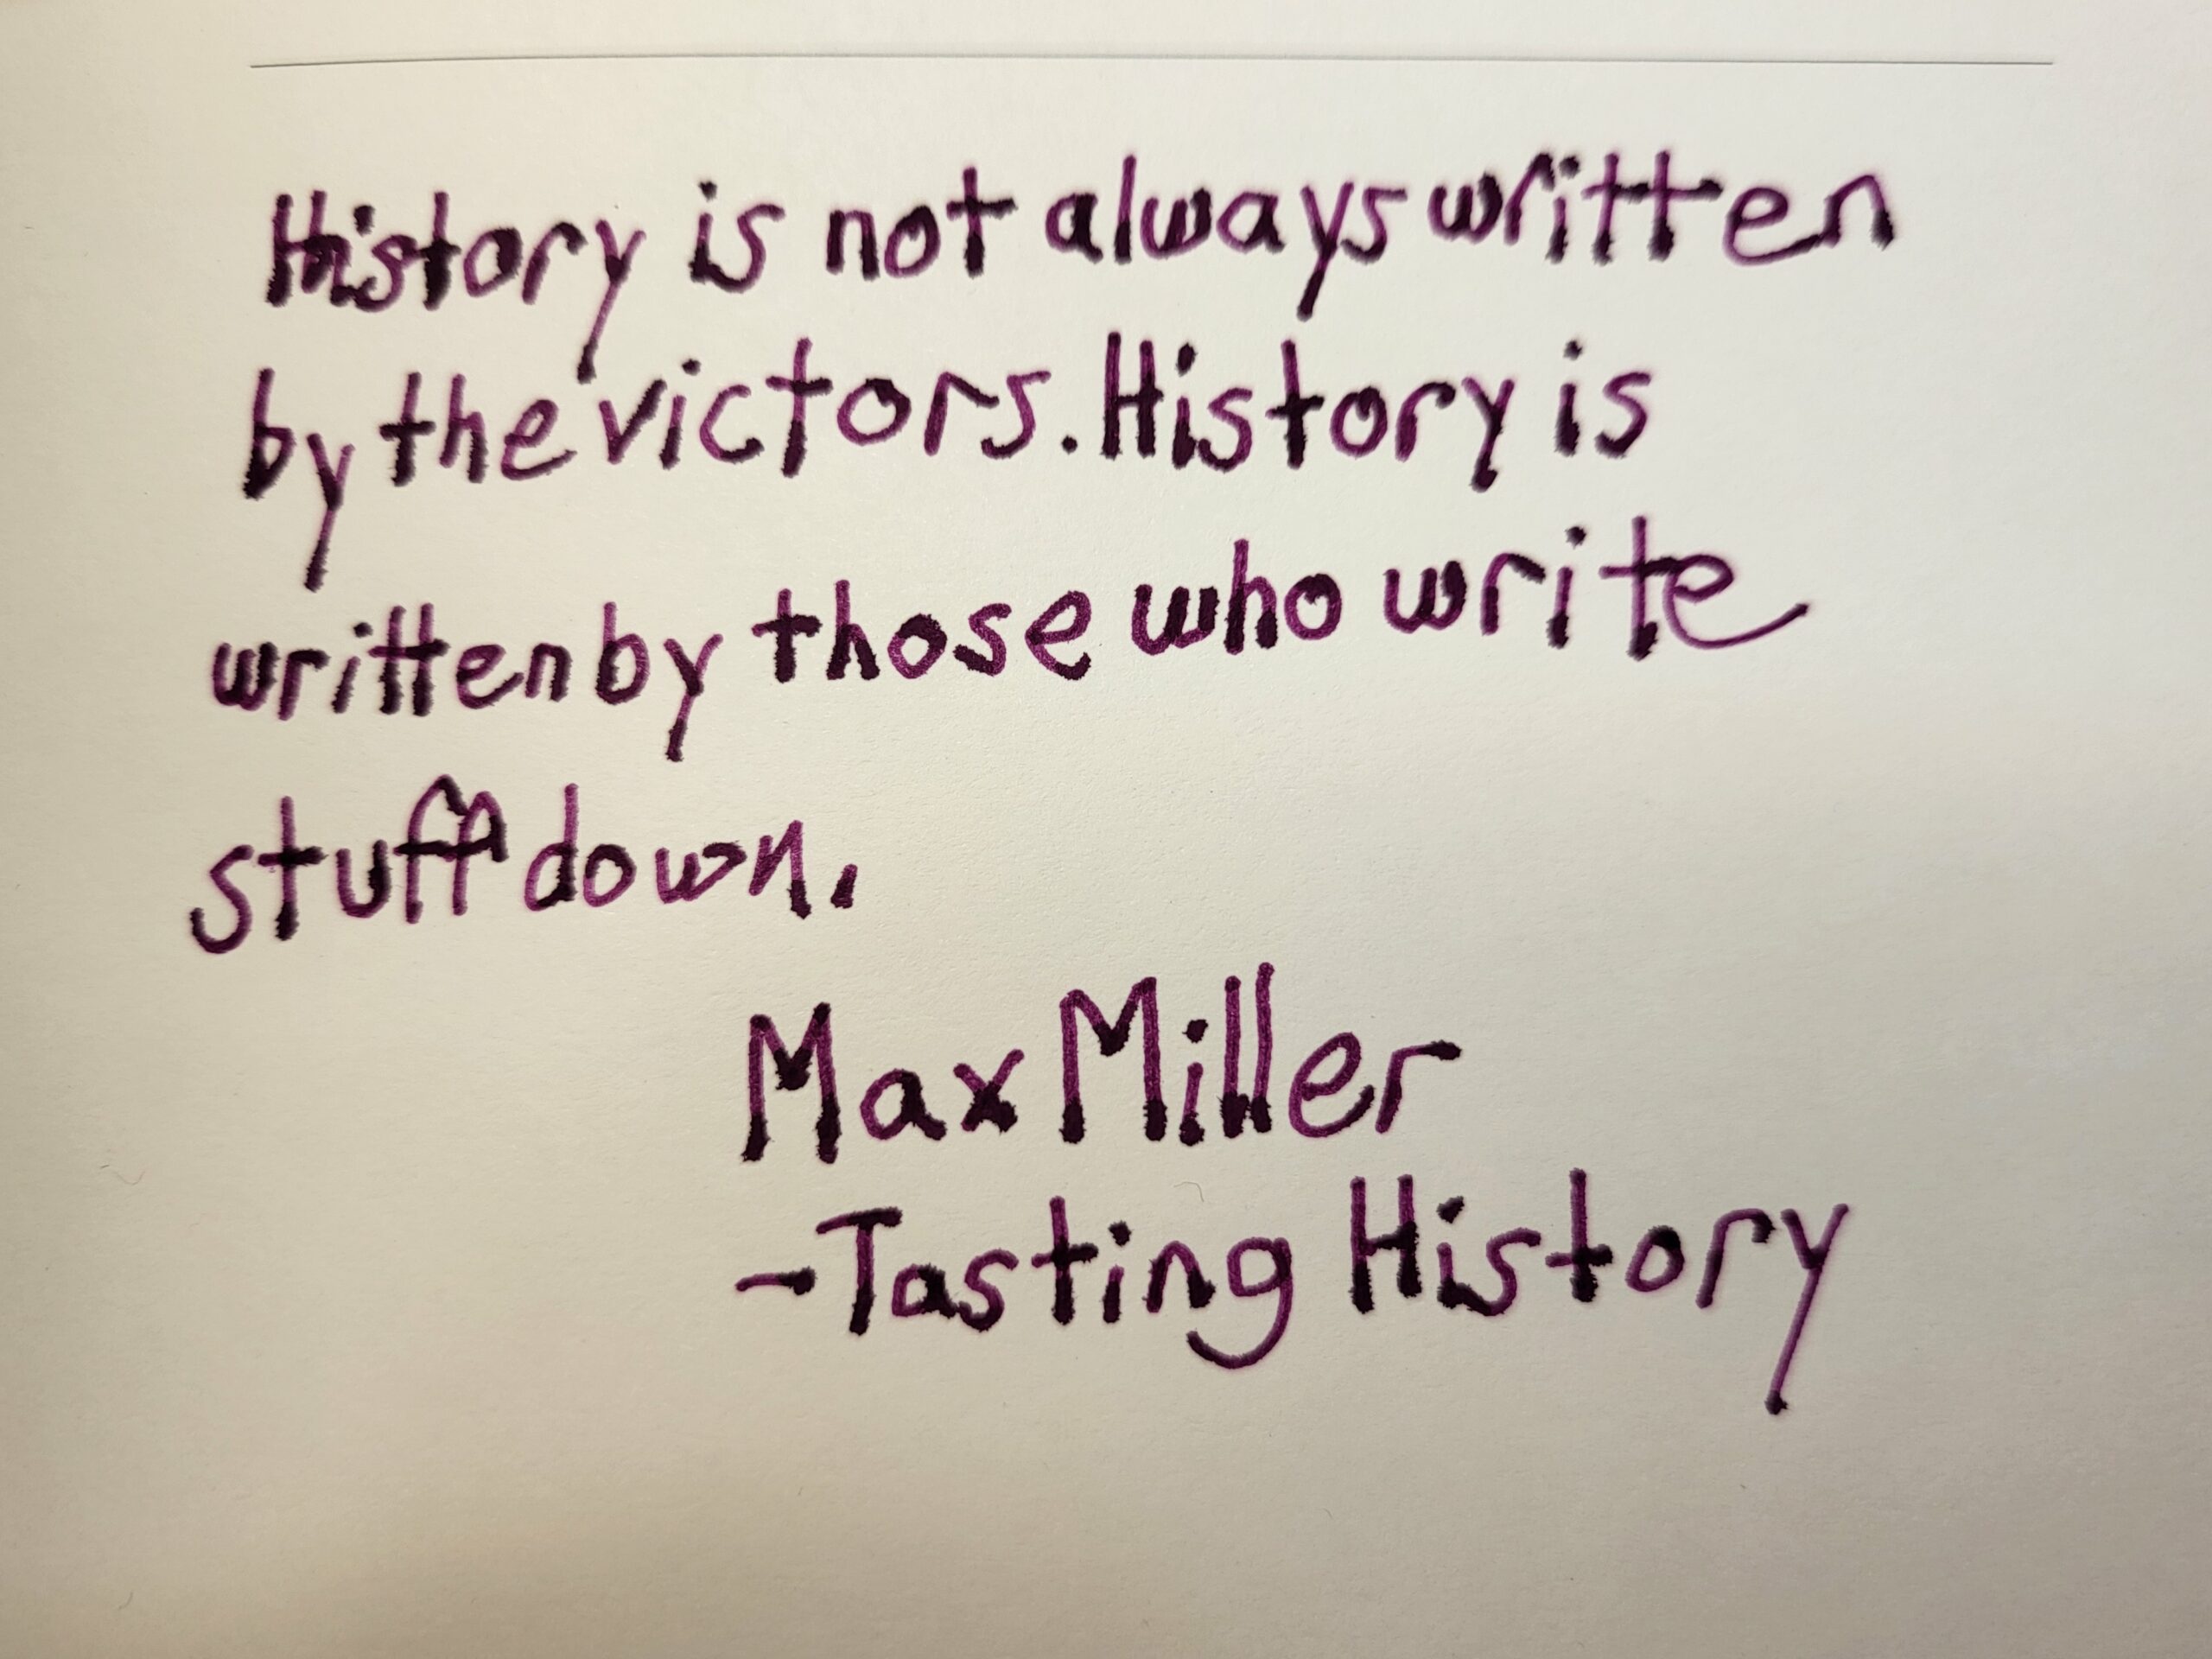 A handwritten quote in the front of my diary, "History is not always written by the victors. History is written by those who write stuff down." Max Miller - Tasting History